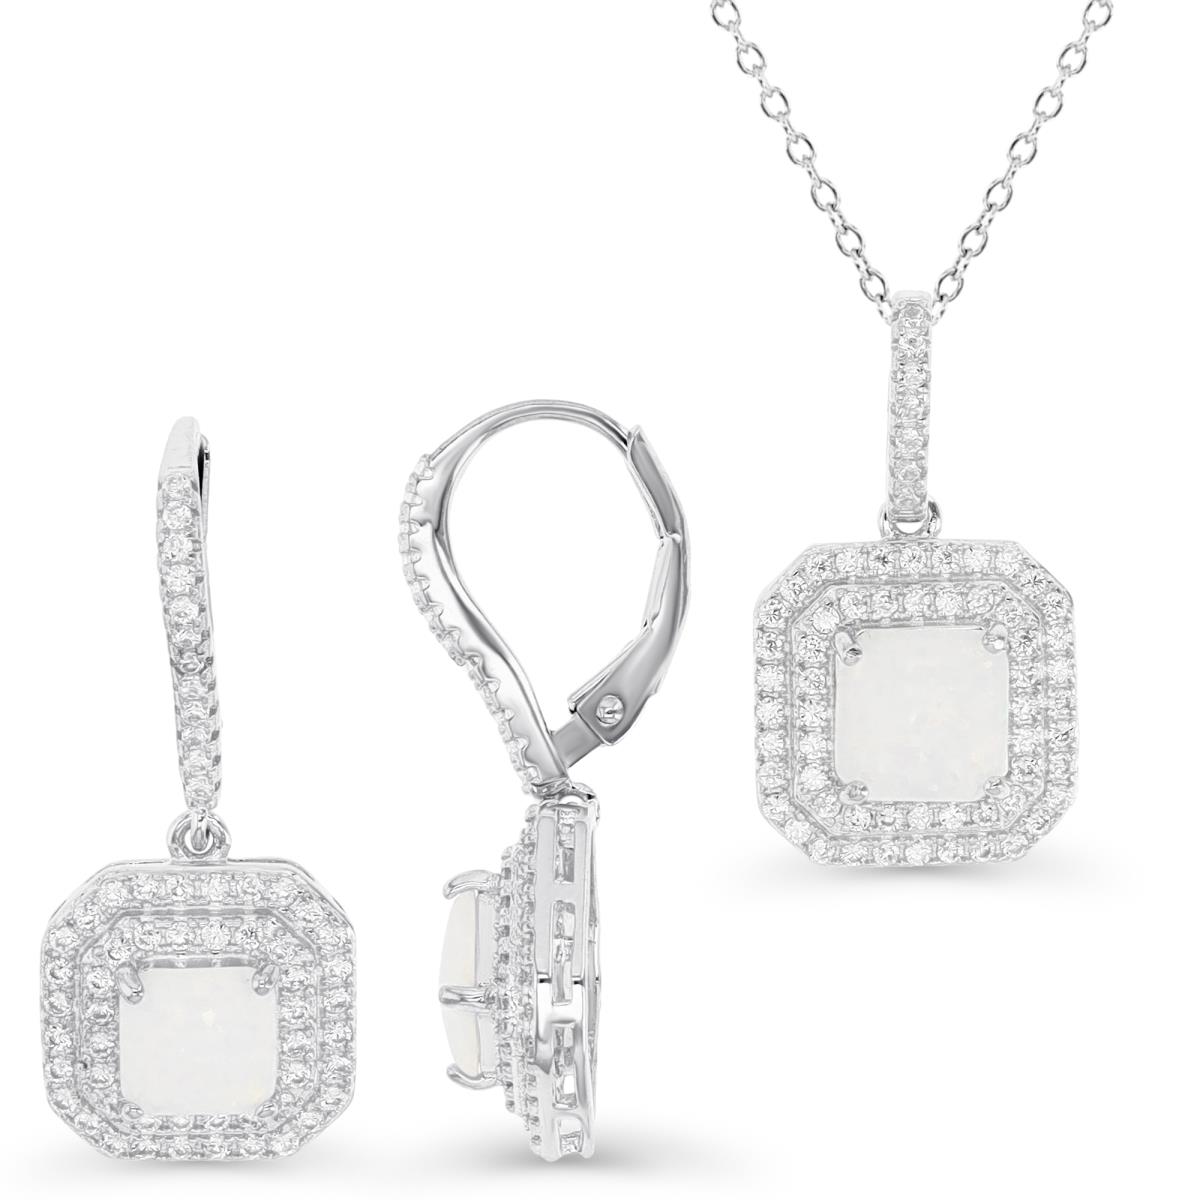 Sterling Silver Rhodium & CU Ct. Cr. White Opal and White CZ Halo Earrings and 18" Necklace Set